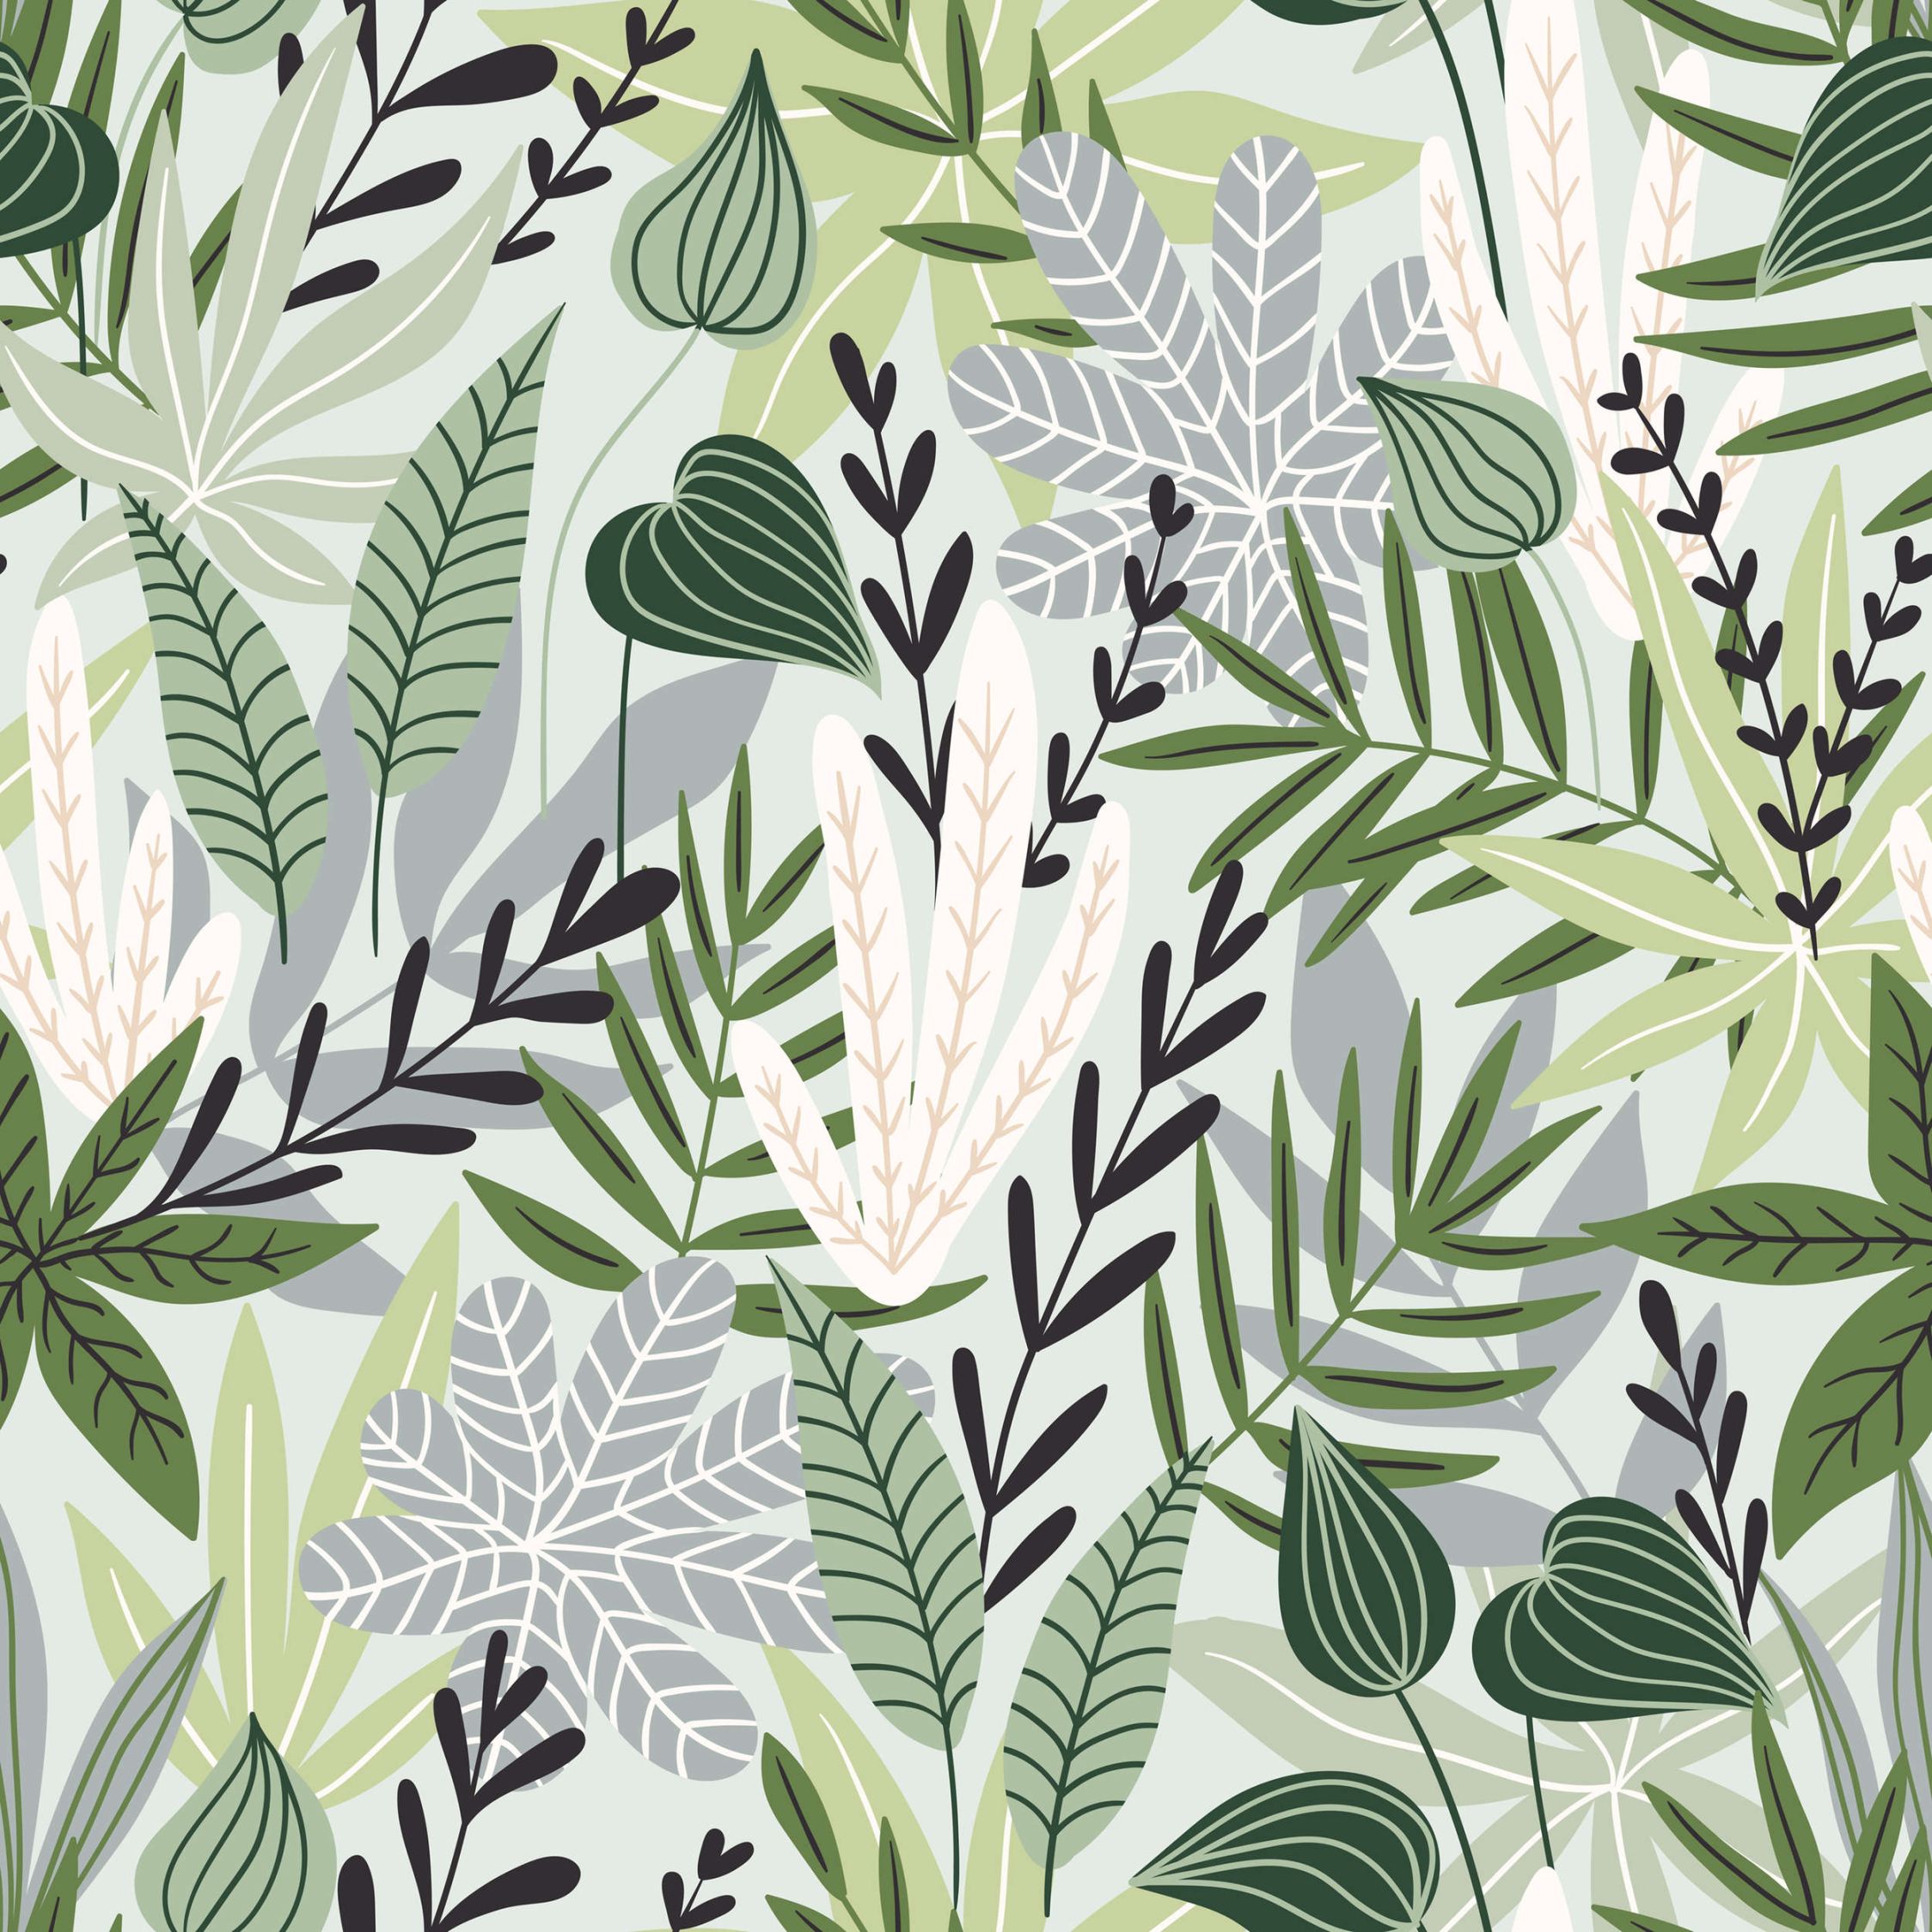             Photo wallpaper Leaves and grasses in comic style - Smooth & matt non-woven
        